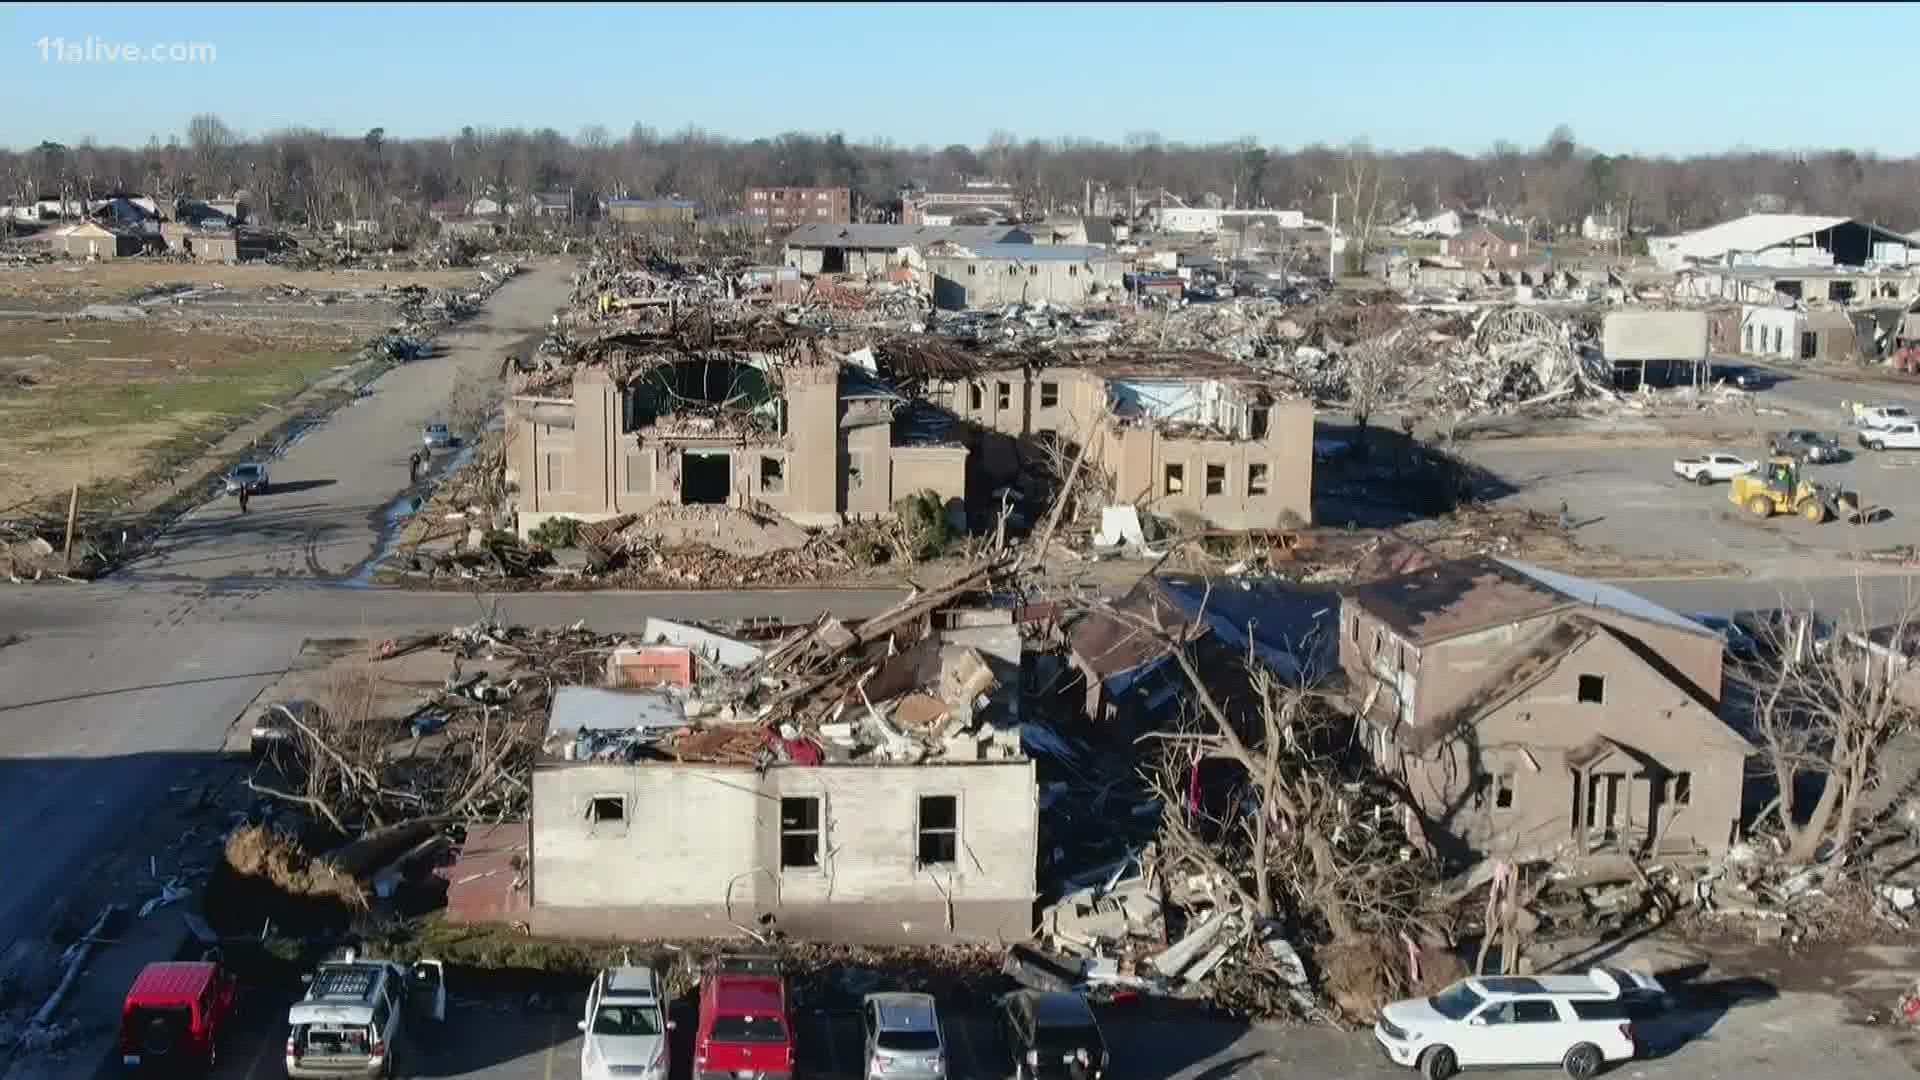 Kentucky's governor said at least 74 people were killed in the state during the tornados.